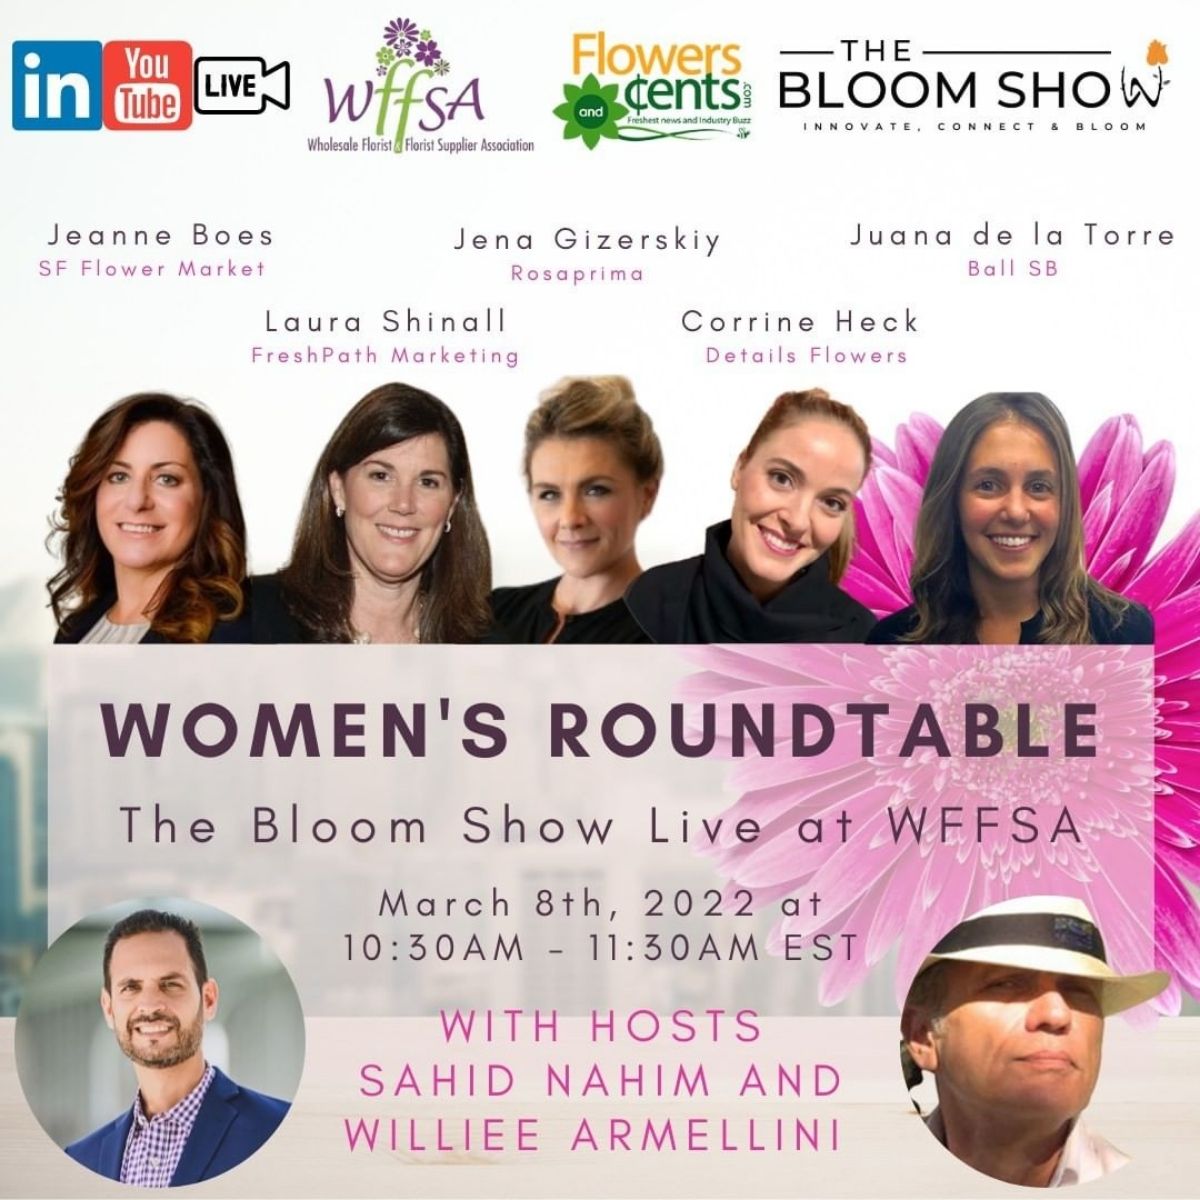 Women's Day Roundtable at The Bloom Show With Sahid Nahim on Thursd